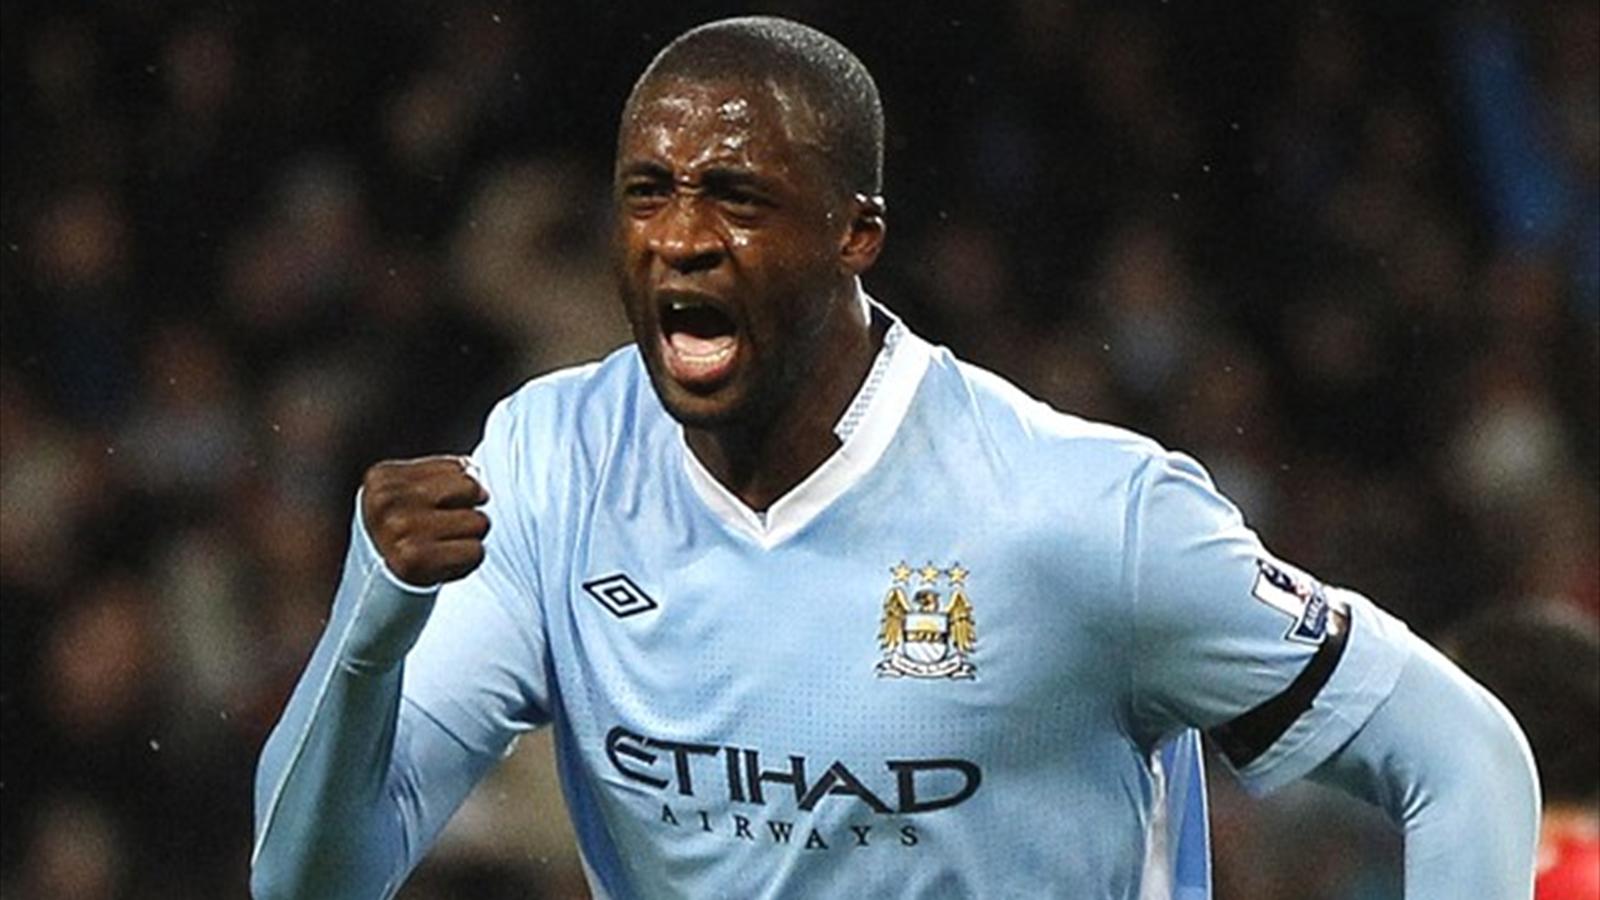 Yaya Toure Wins 'African Player of the Year'. AFRICA ON THE RISE